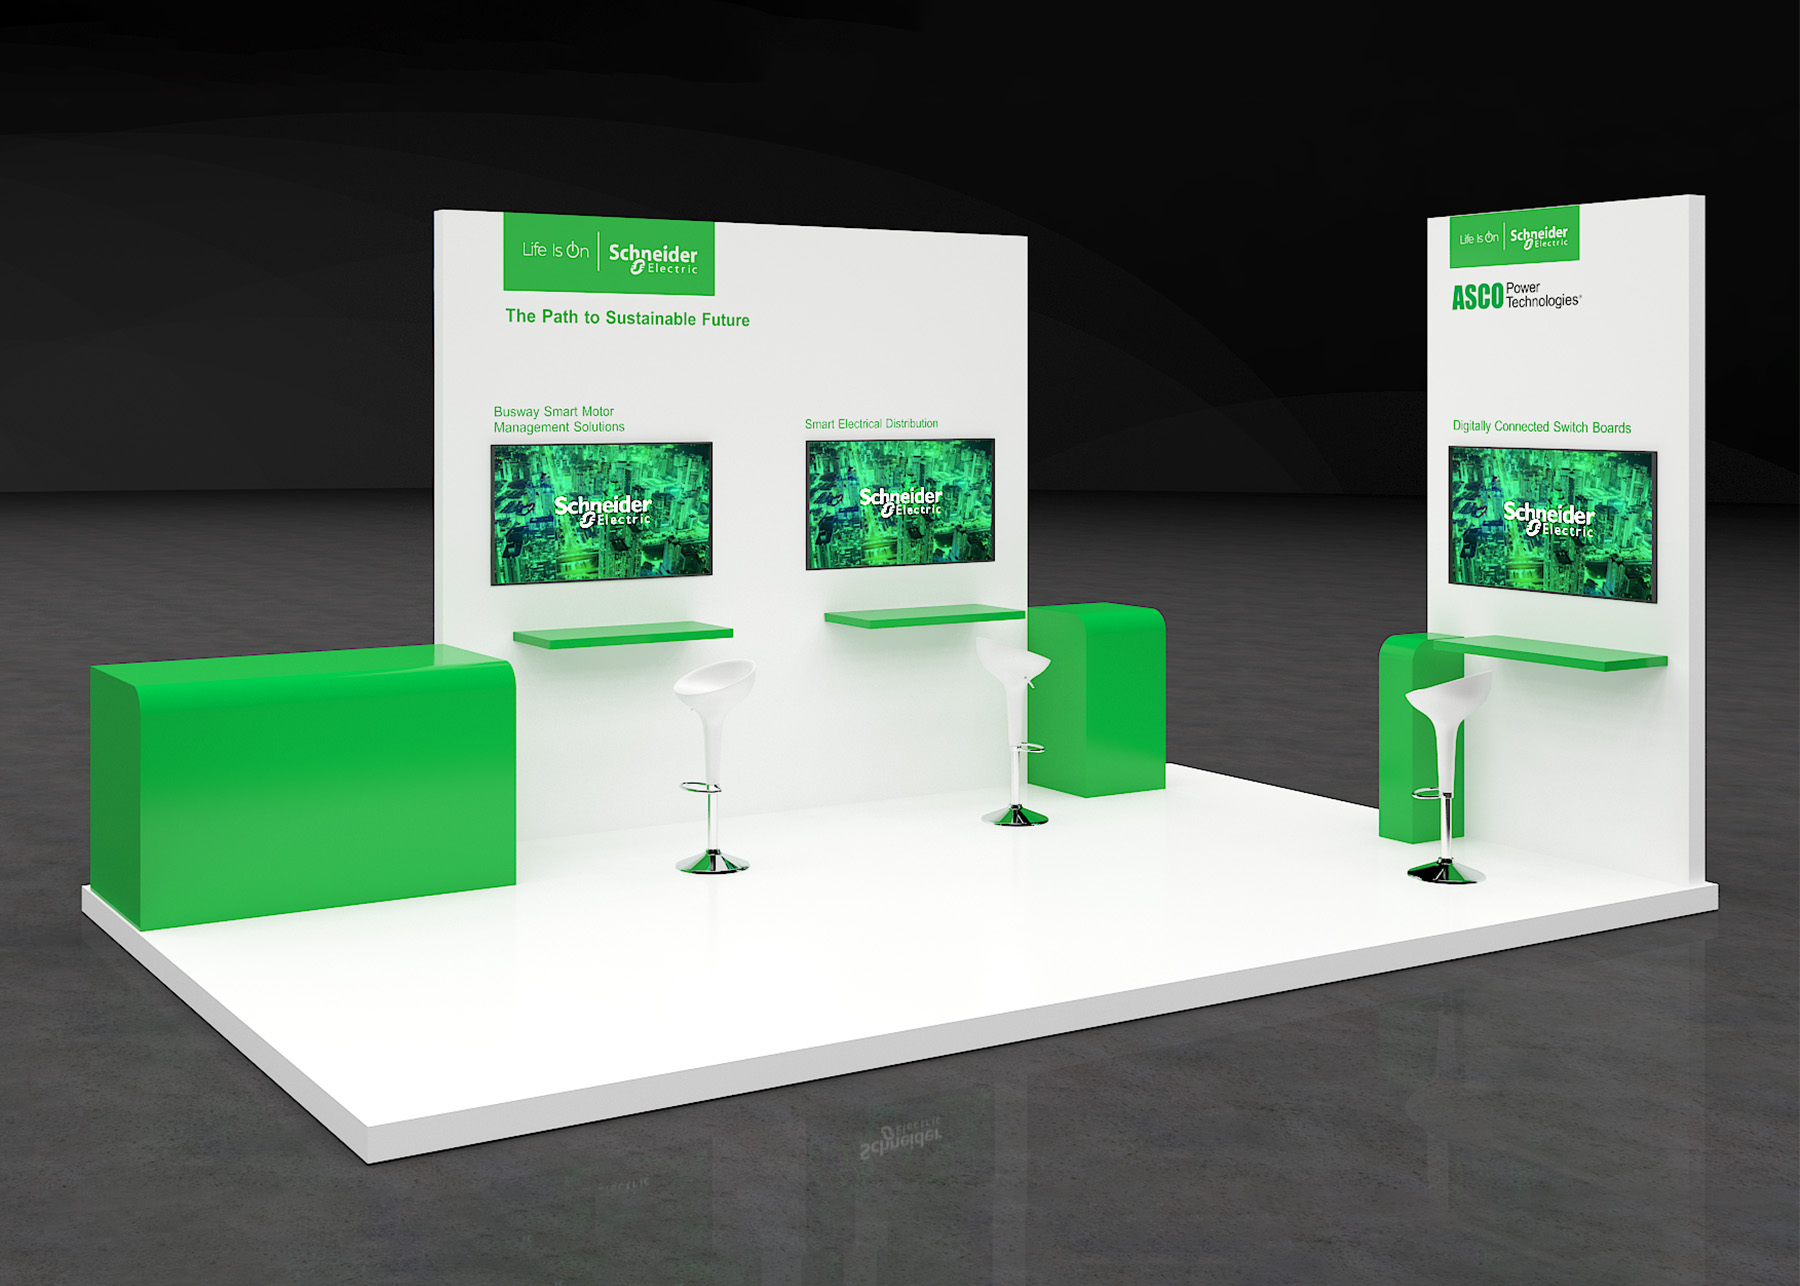 3D mock up of the Schneider booth